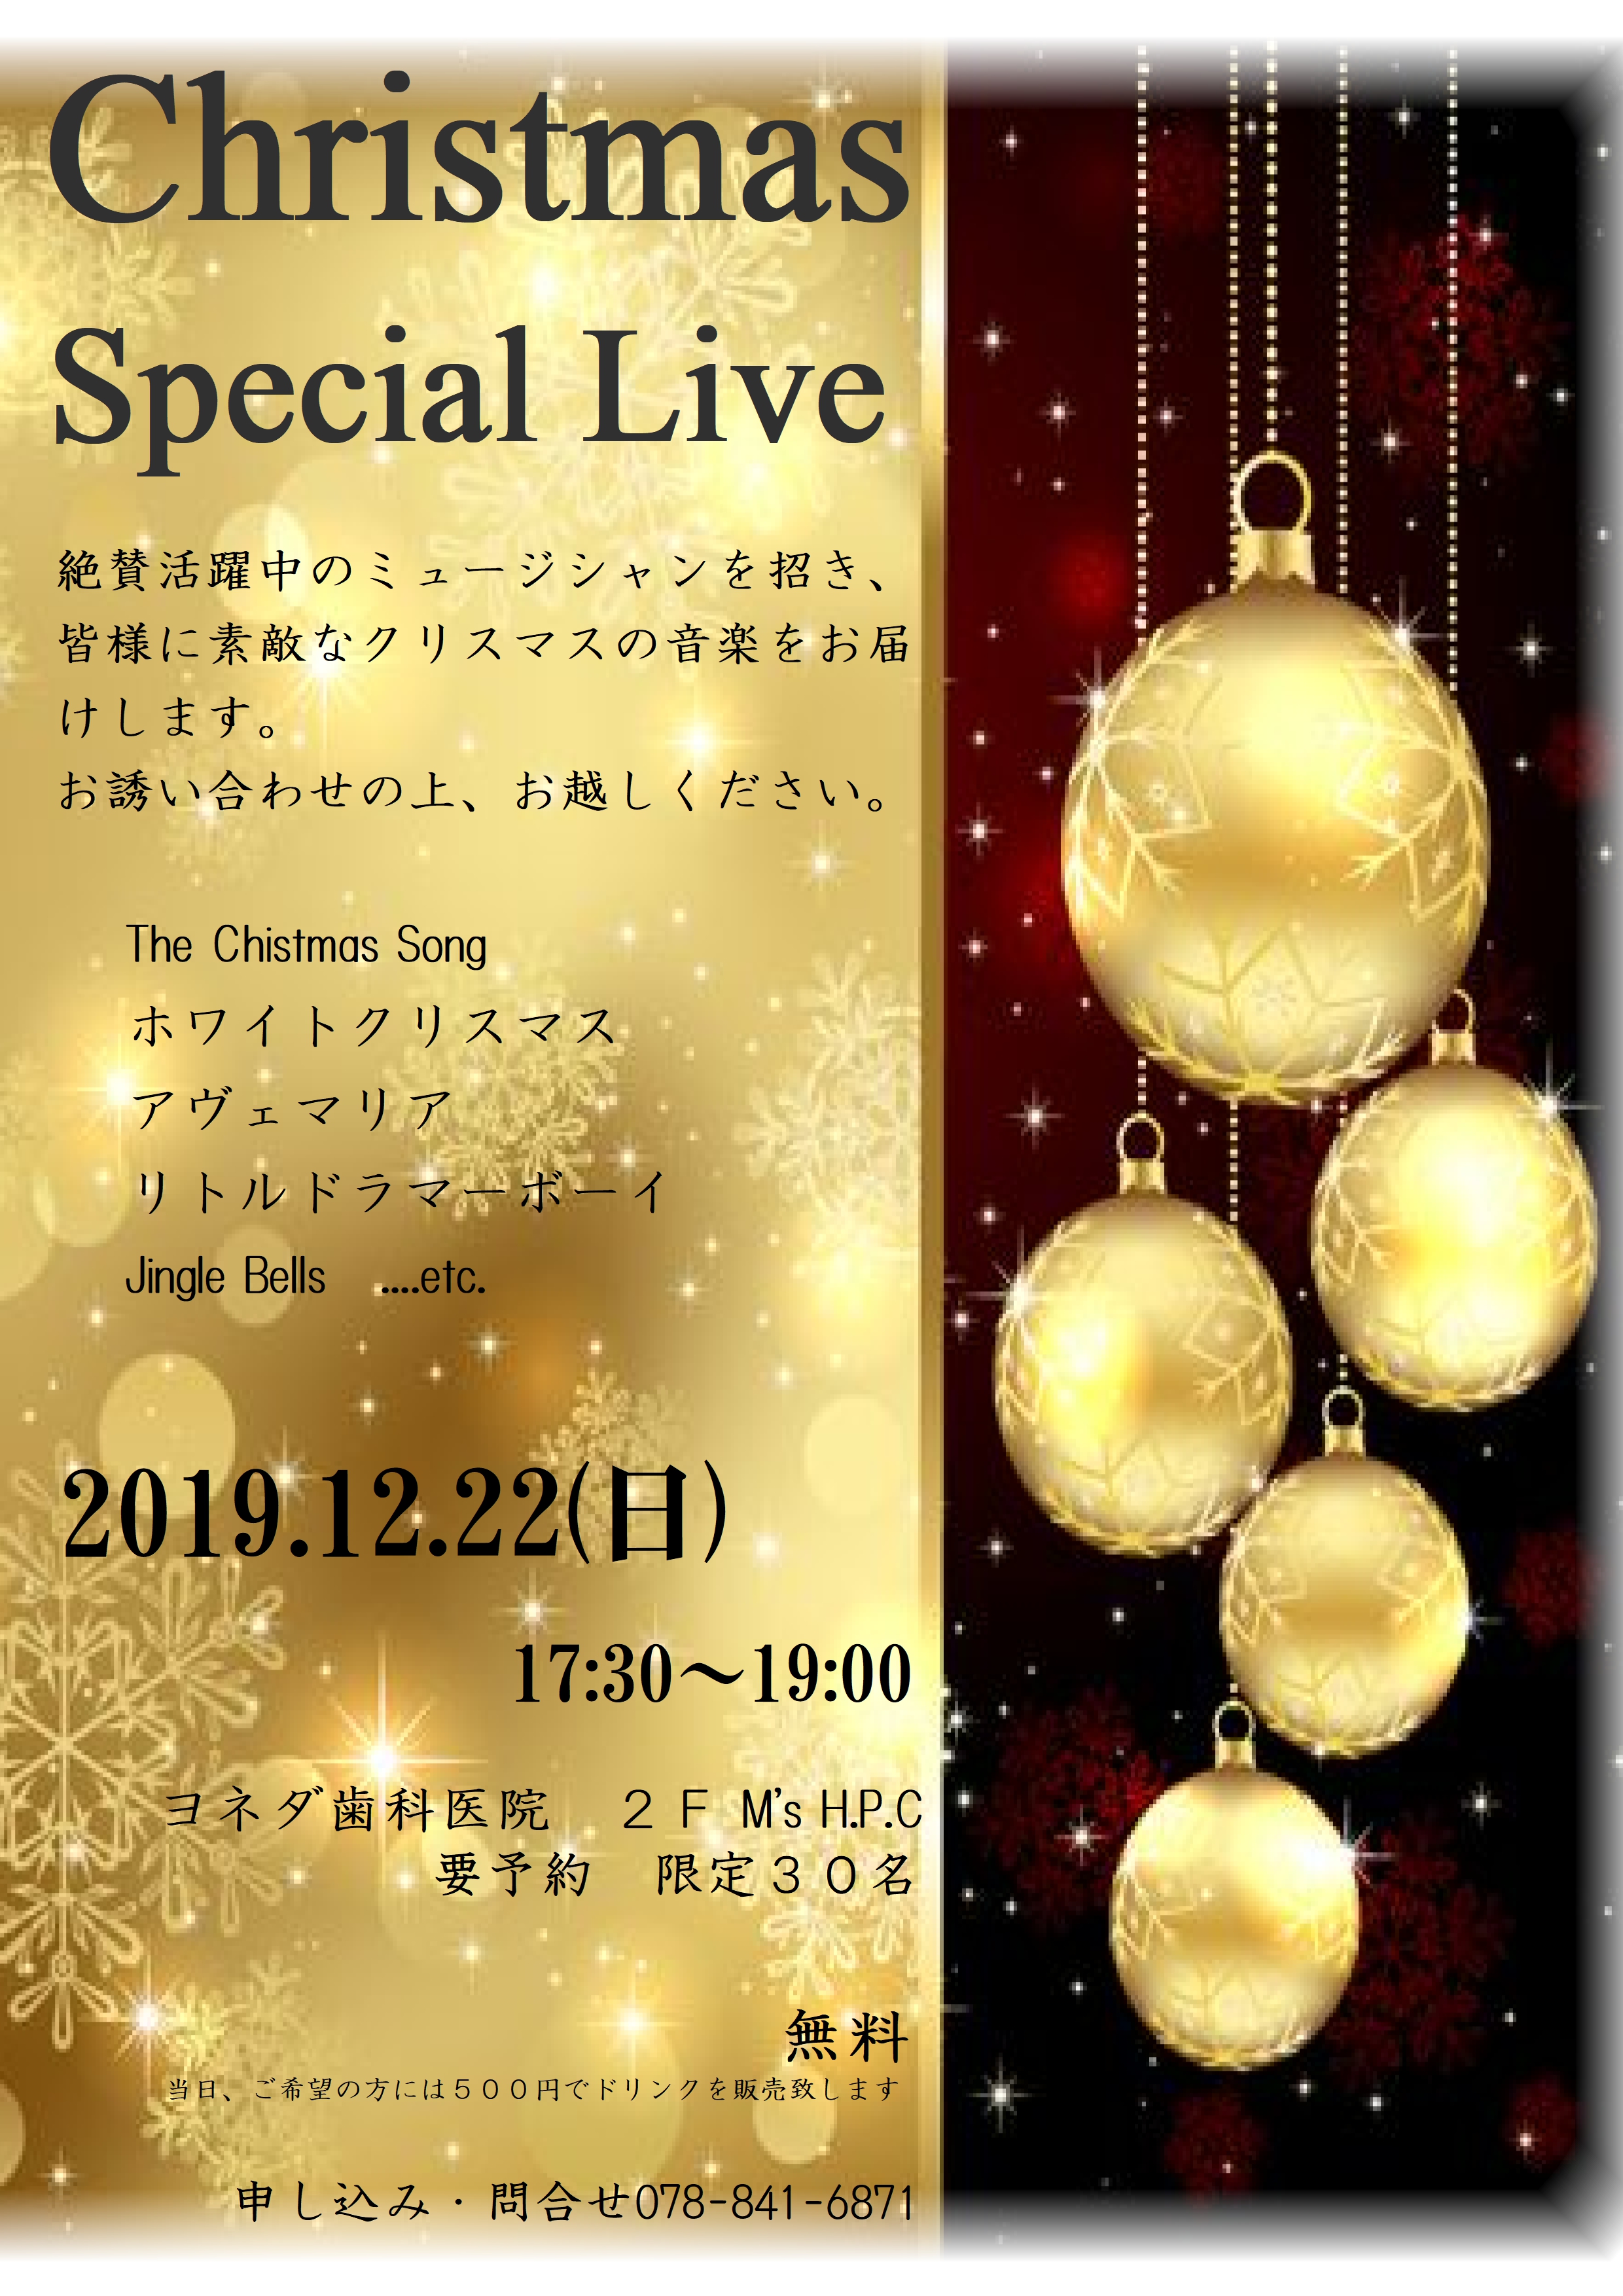 Christmas Special Live | 神戸市東灘区のヨネダ歯科